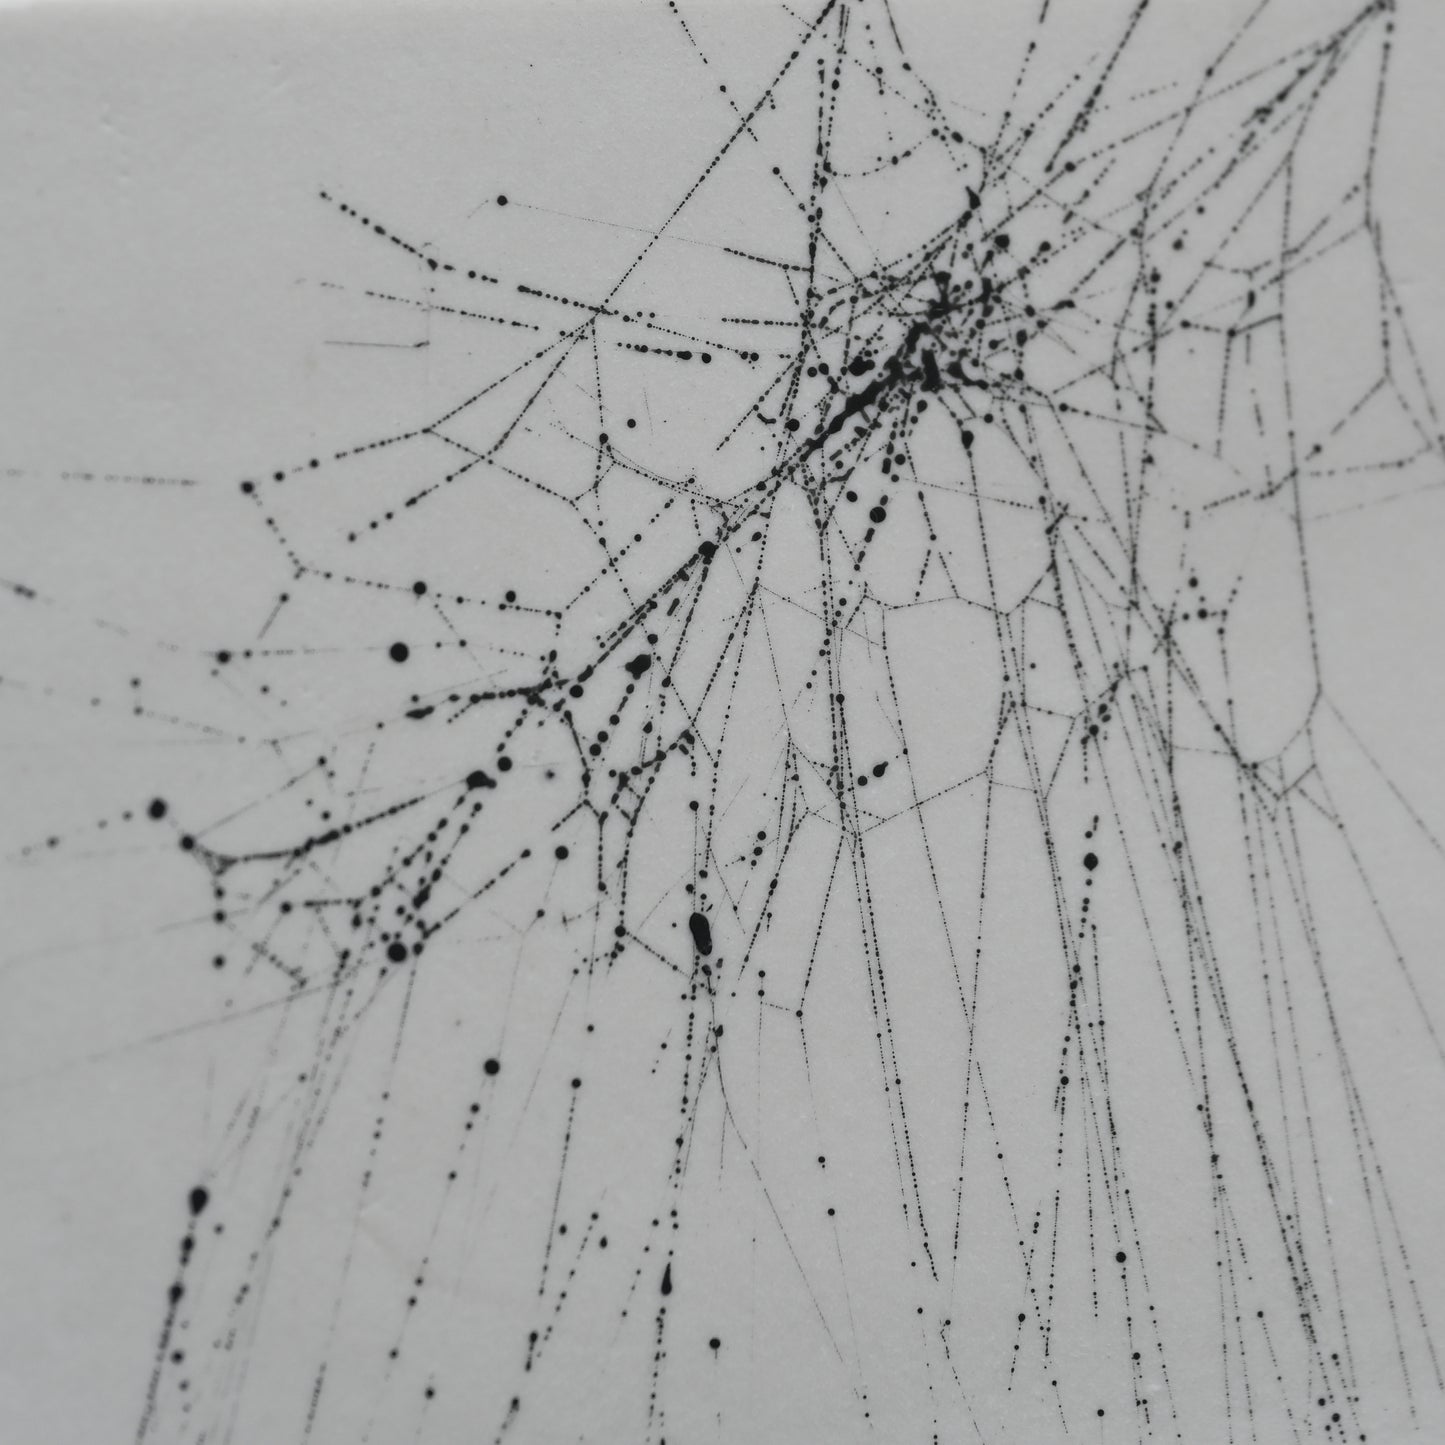 Web on Clay (140), Collected August 31, 2022